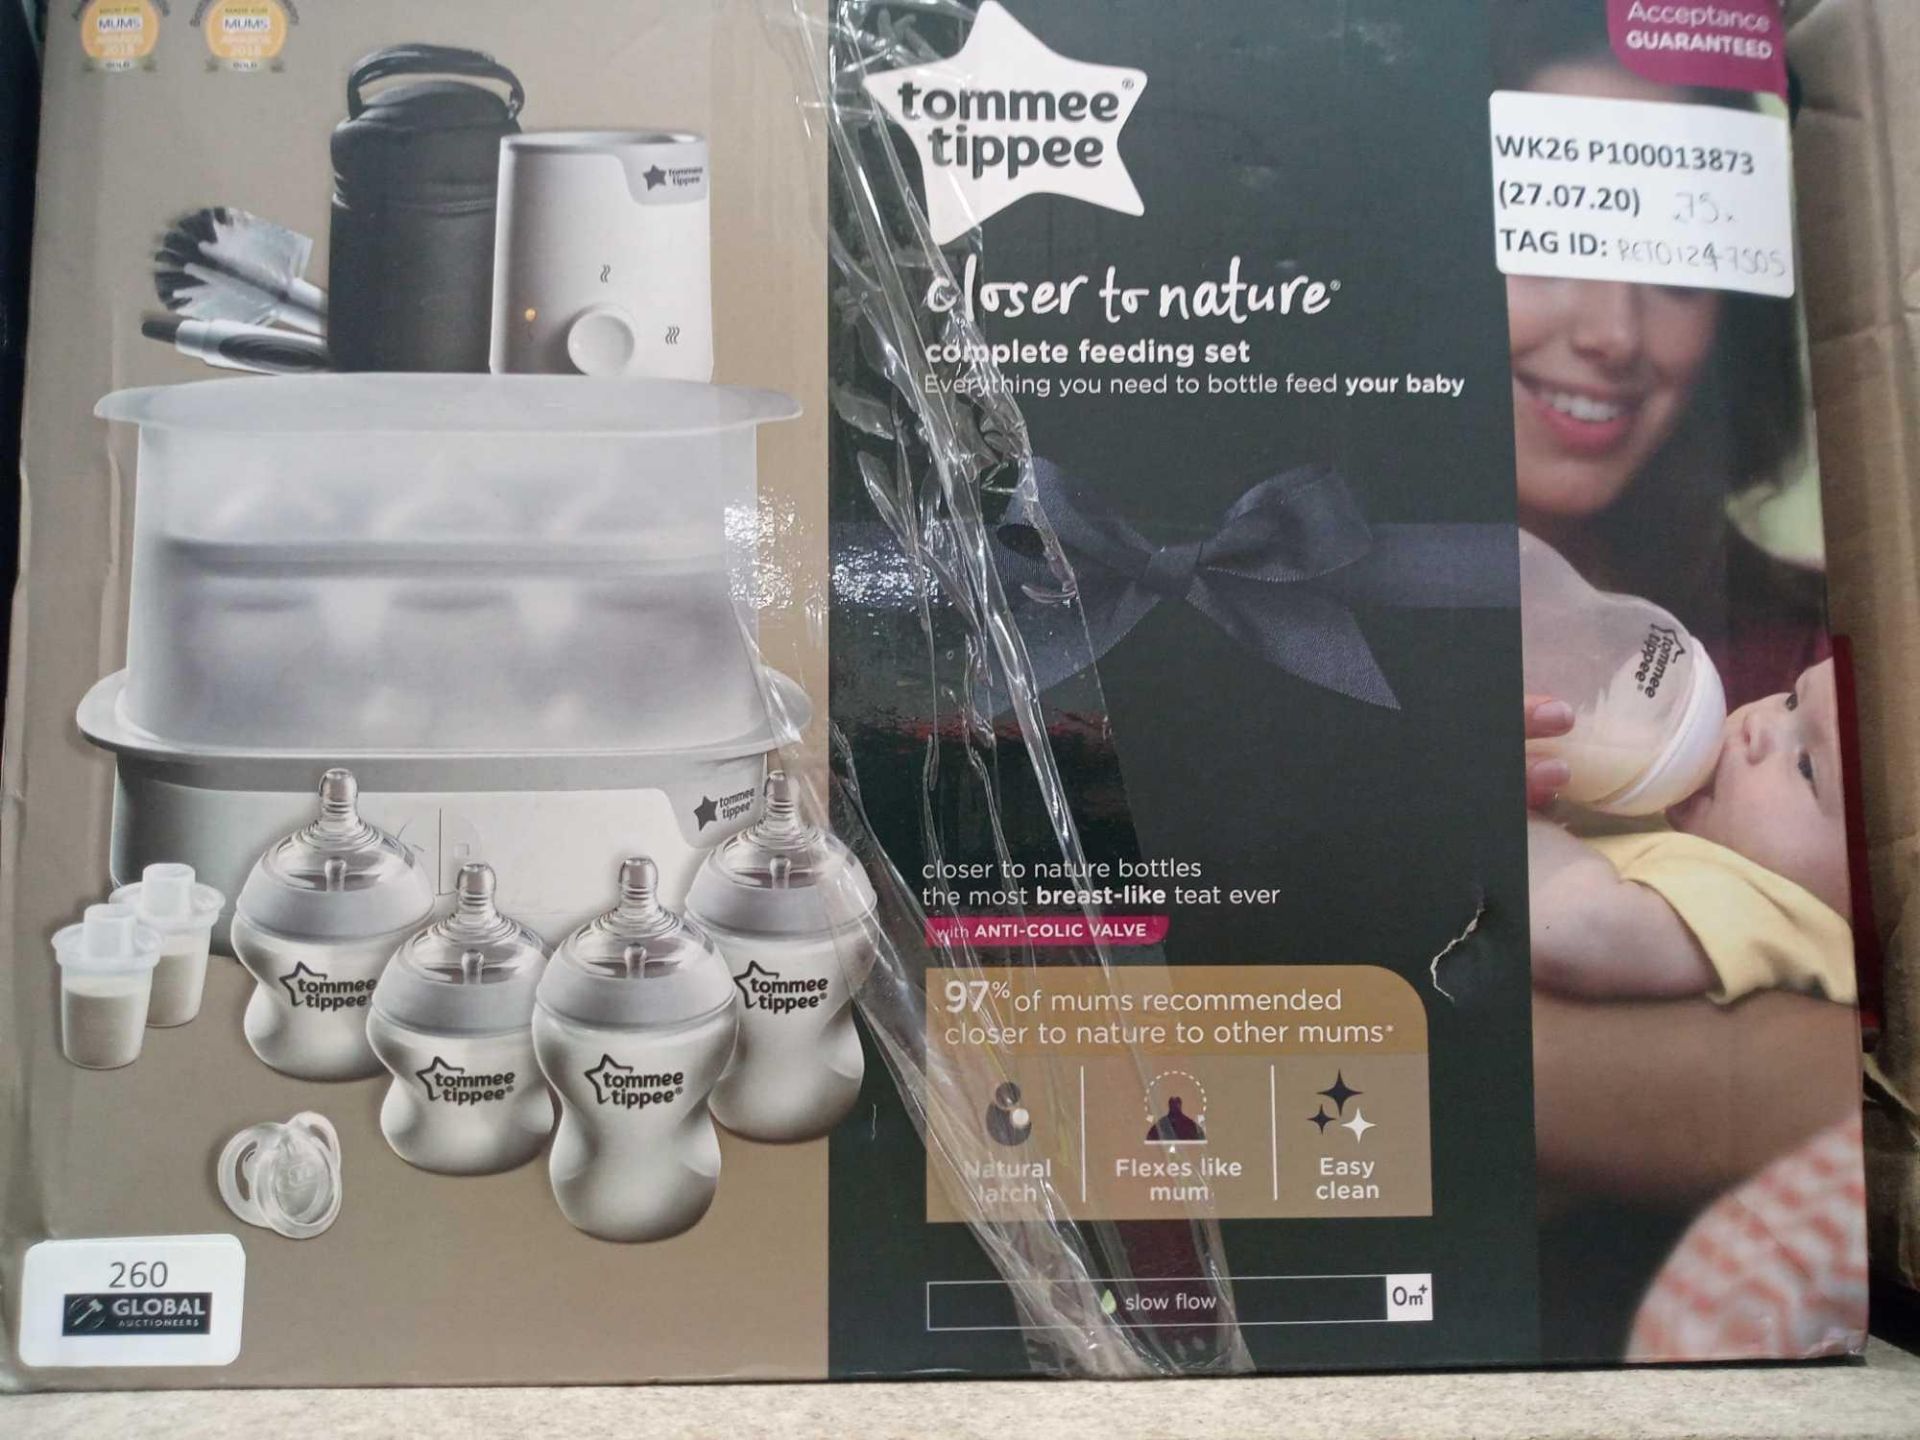 Rrp £75 Boxed Tommee Tippee Complete Feeding Set